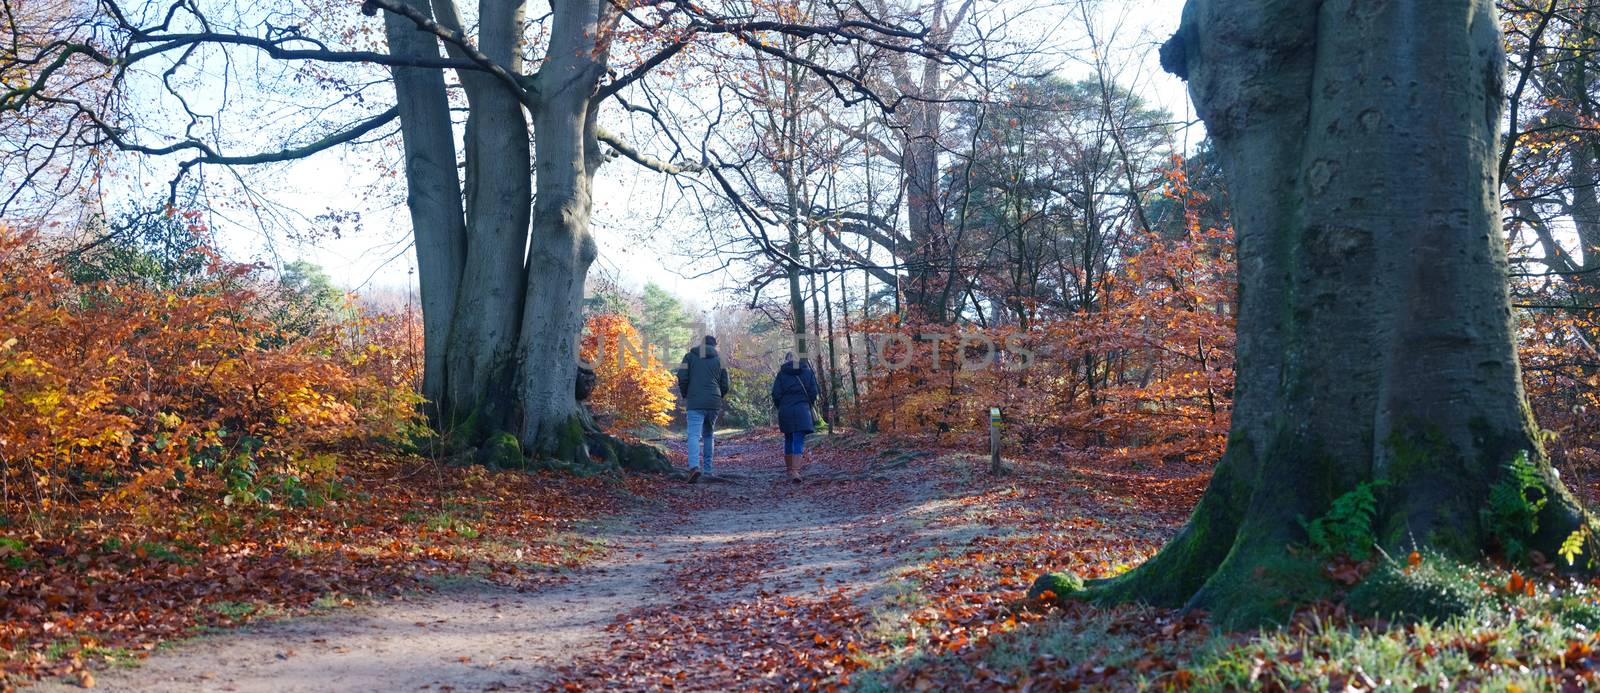 couple walks in autumn forest on sunny day in the fall near dutch city of utrecht